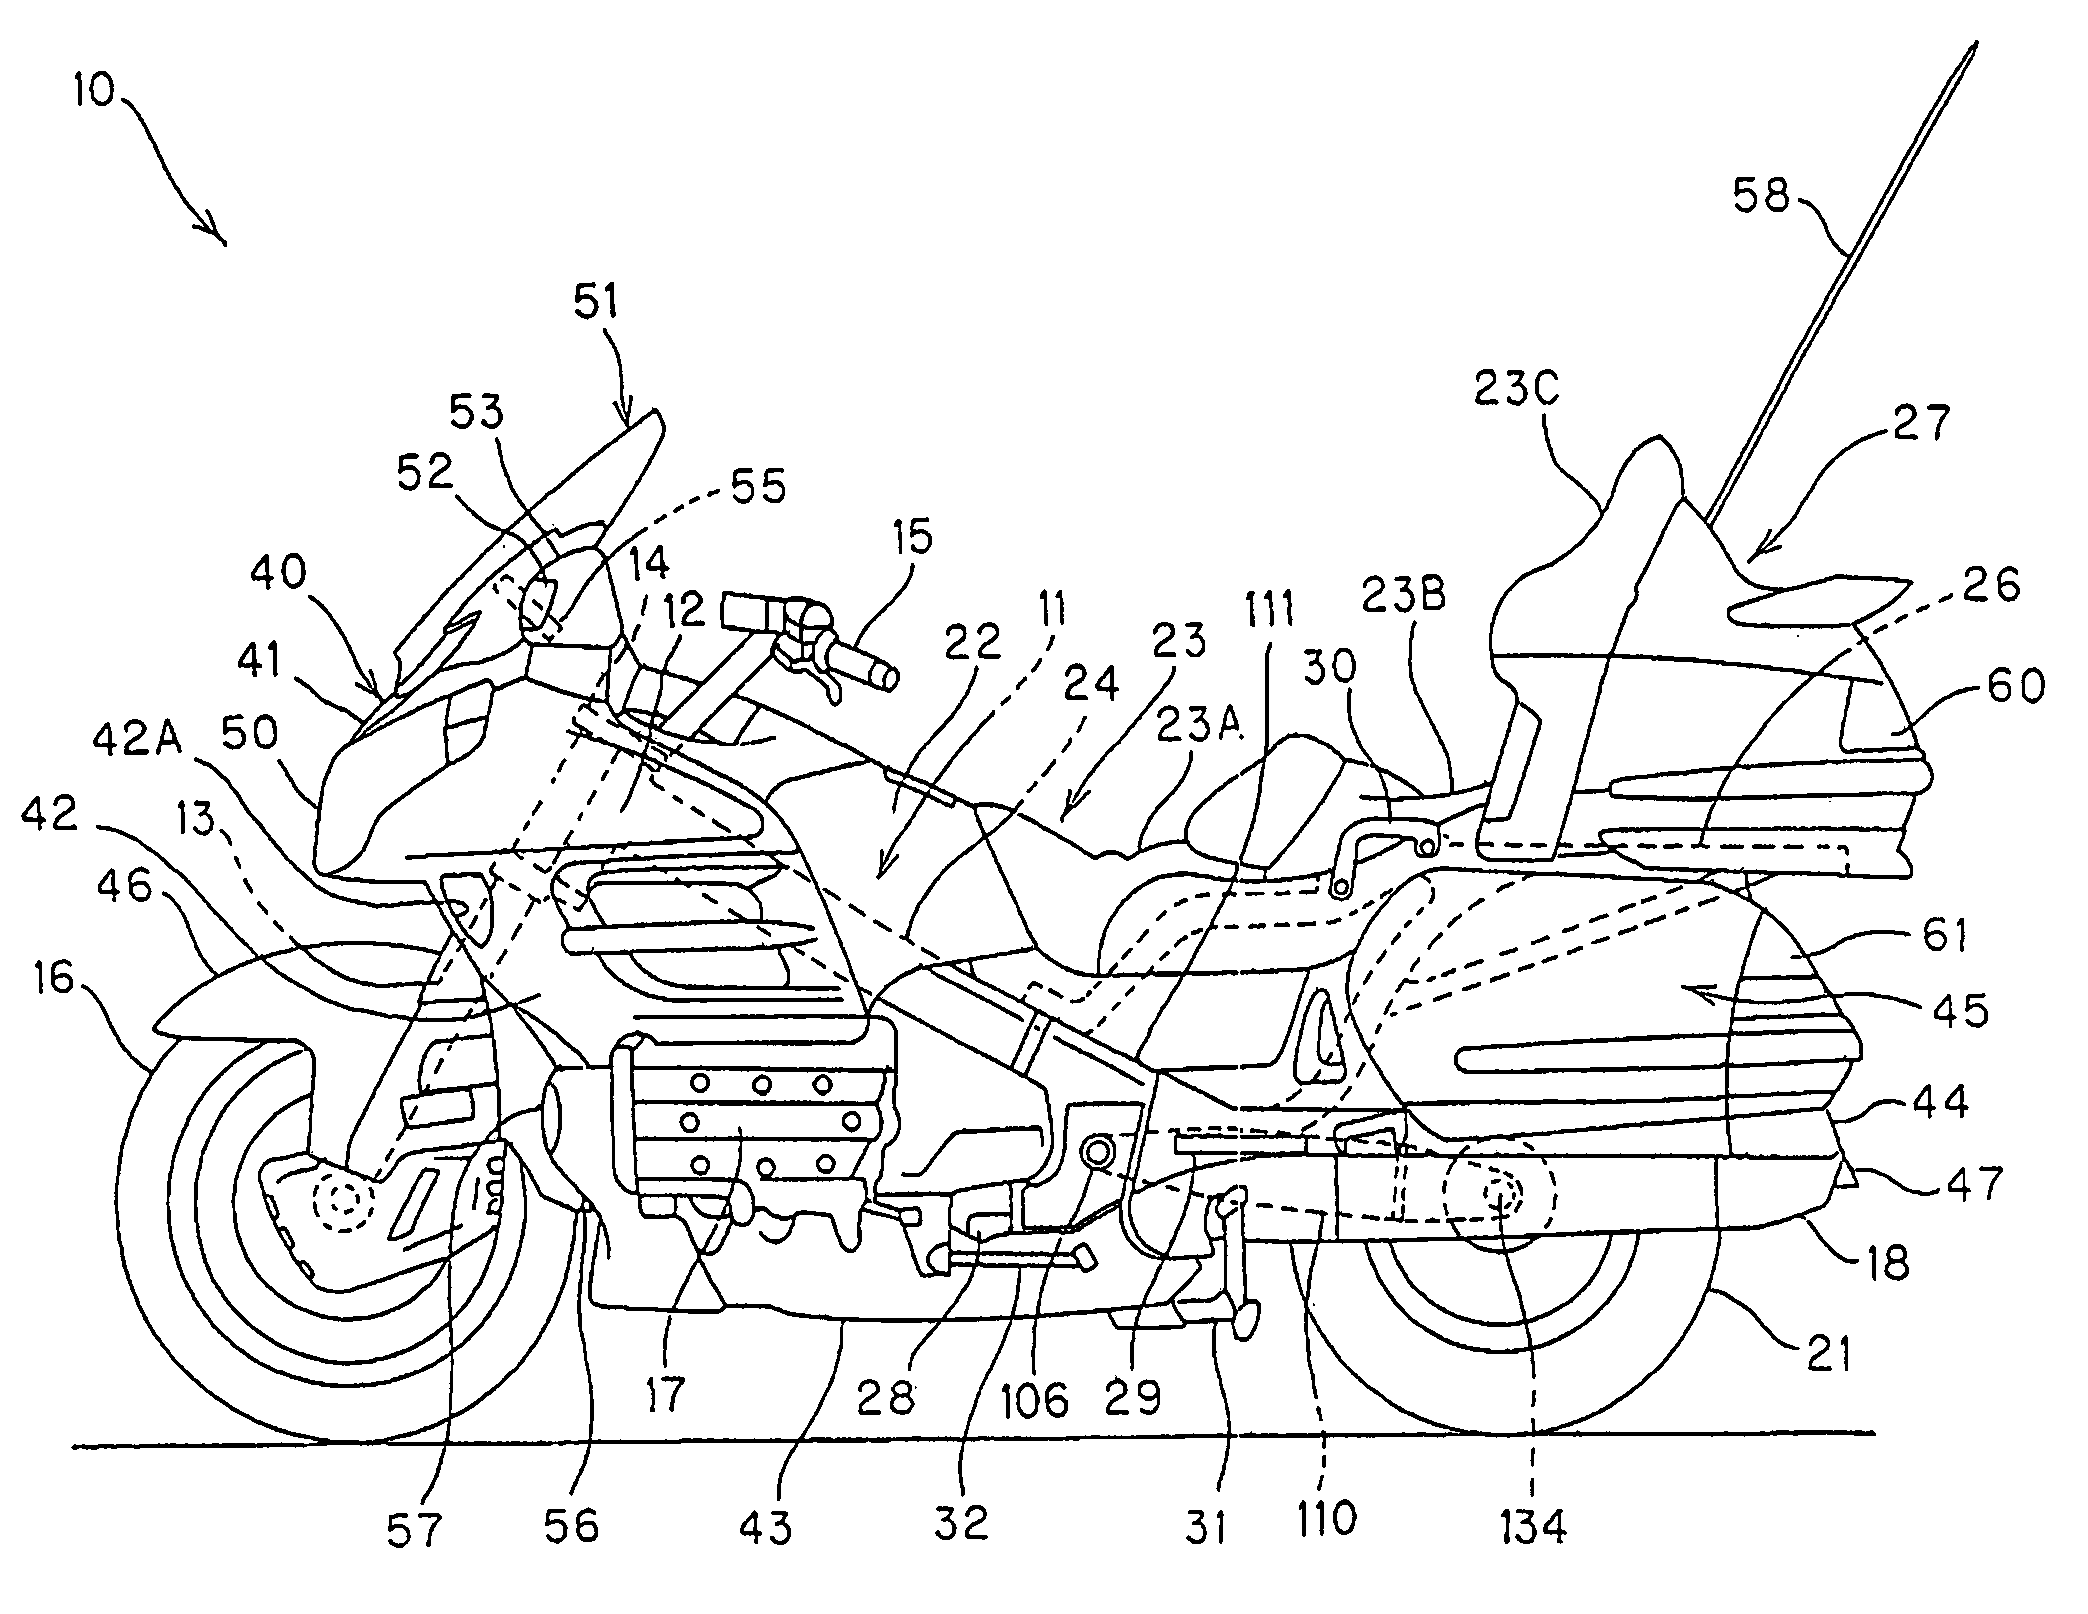 Shaft-driven motorcycle with pivotally mounted swing arm and related support structure